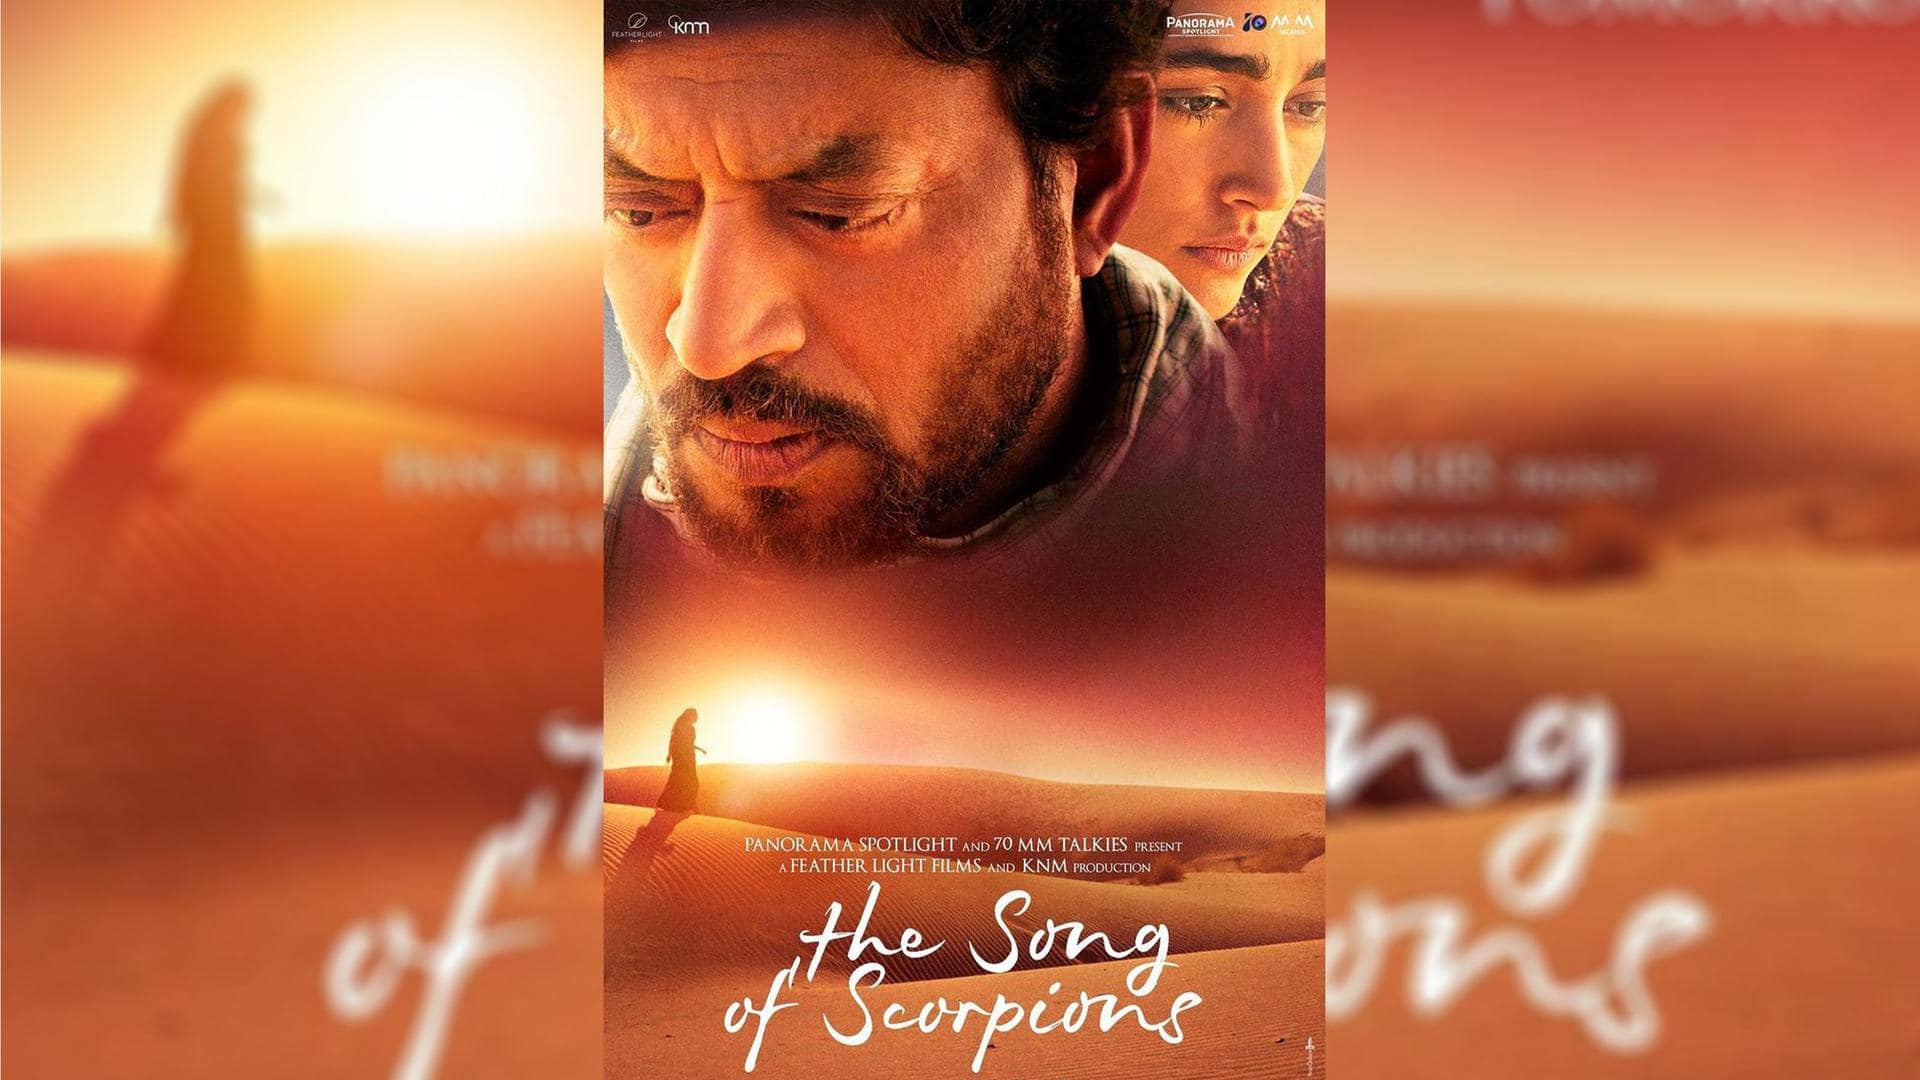 Irrfan Khan's 'The Song of Scorpions' to release in theaters